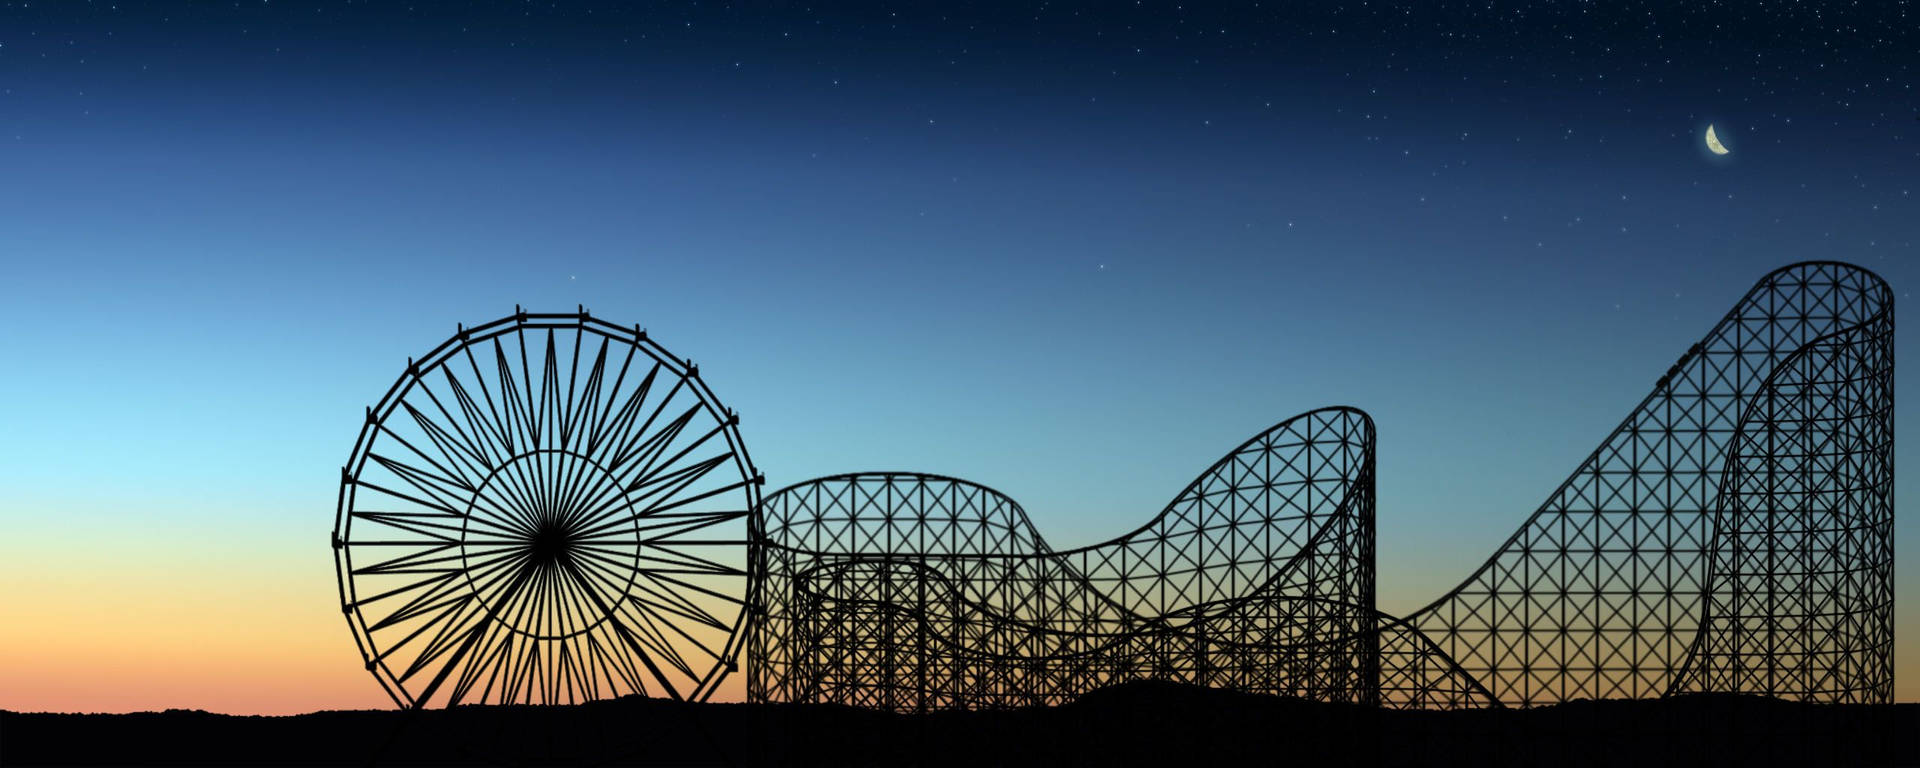 Roller Coaster And Ferris Wheel Silhouettes Wallpaper